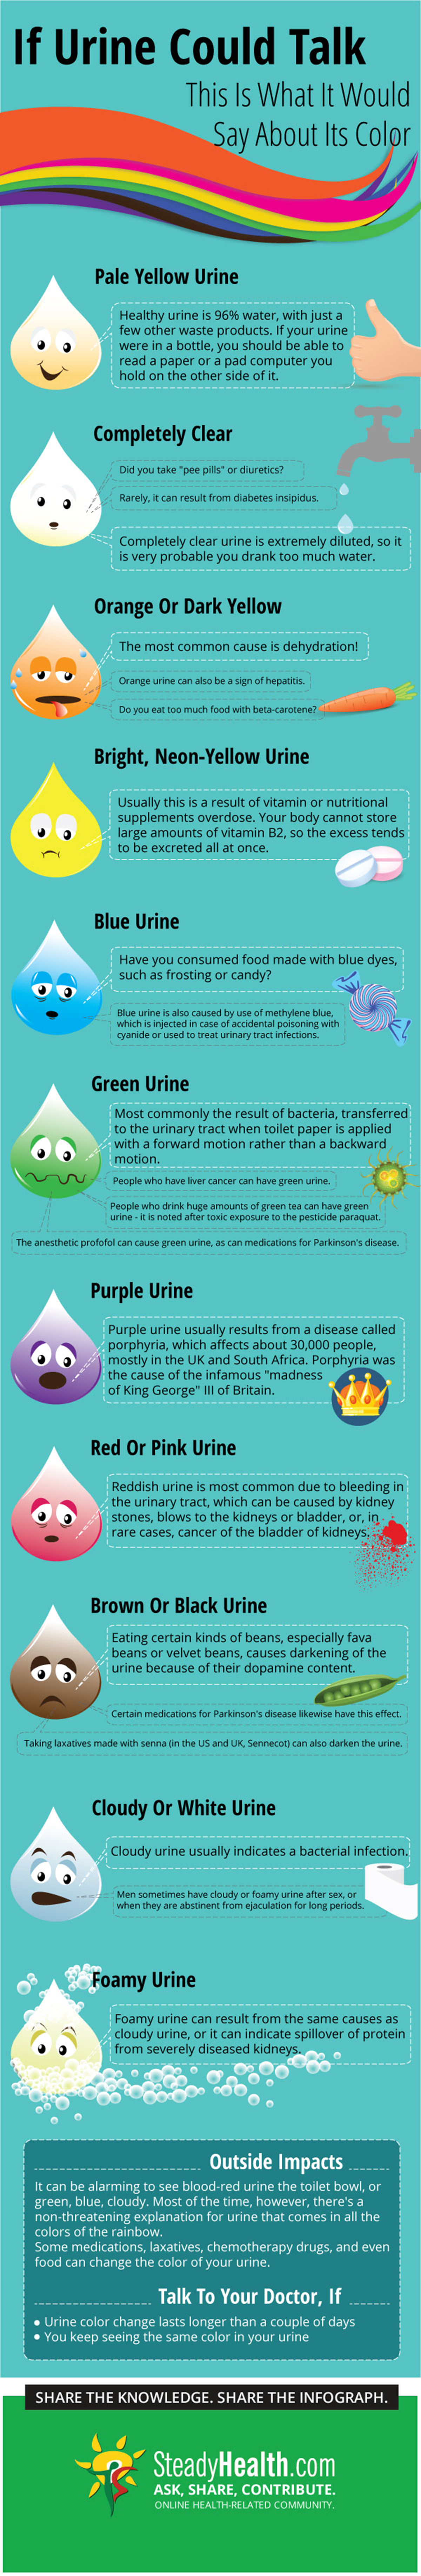 Abnormal Urine Color What It Tells And Doesn T Tell About Your Health Urinary Tract Issues Articles Body Health Conditions Center Steadyhealth Com